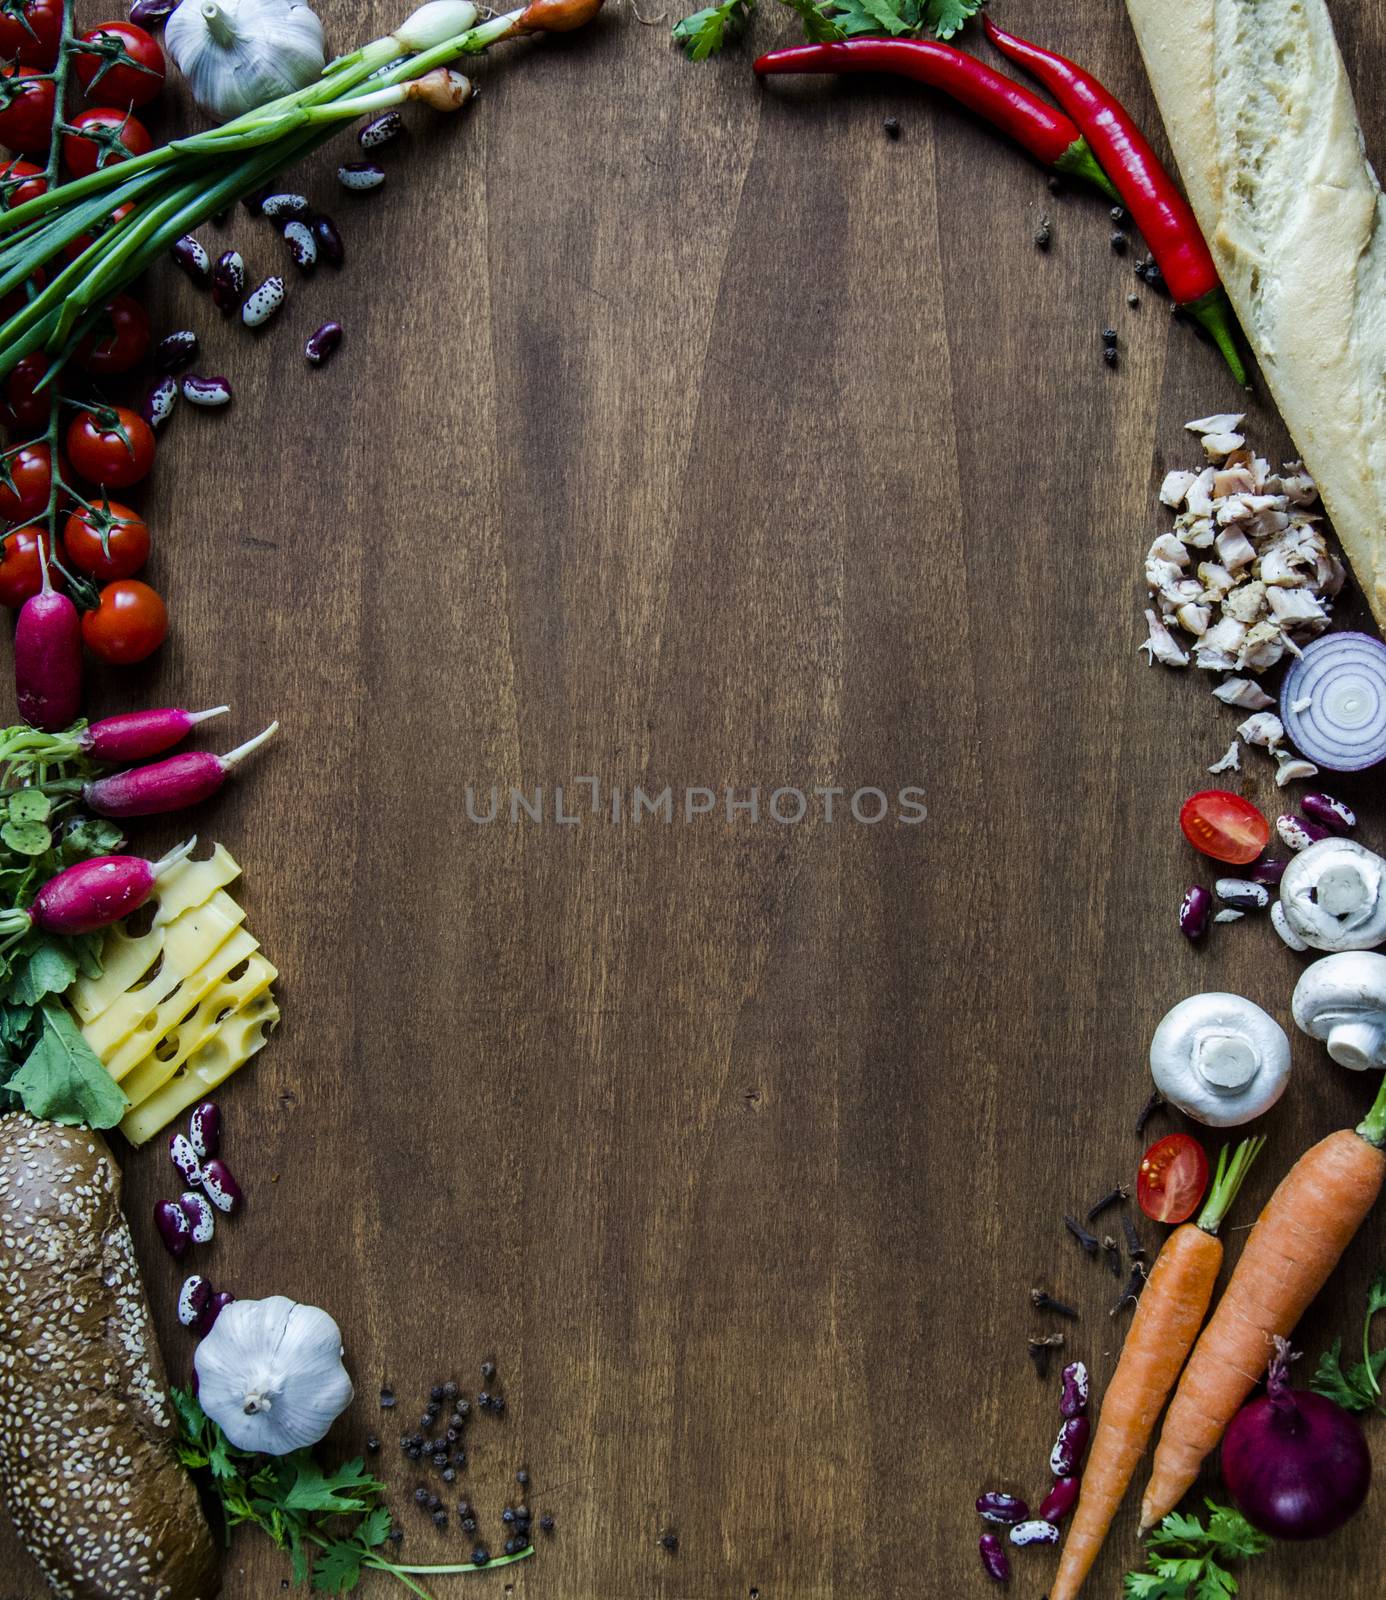 Vegetables, cheese, bread on wood. Bio Healthy food, herbs and spices. Organic vegetables on wood. Mock up with vegetables